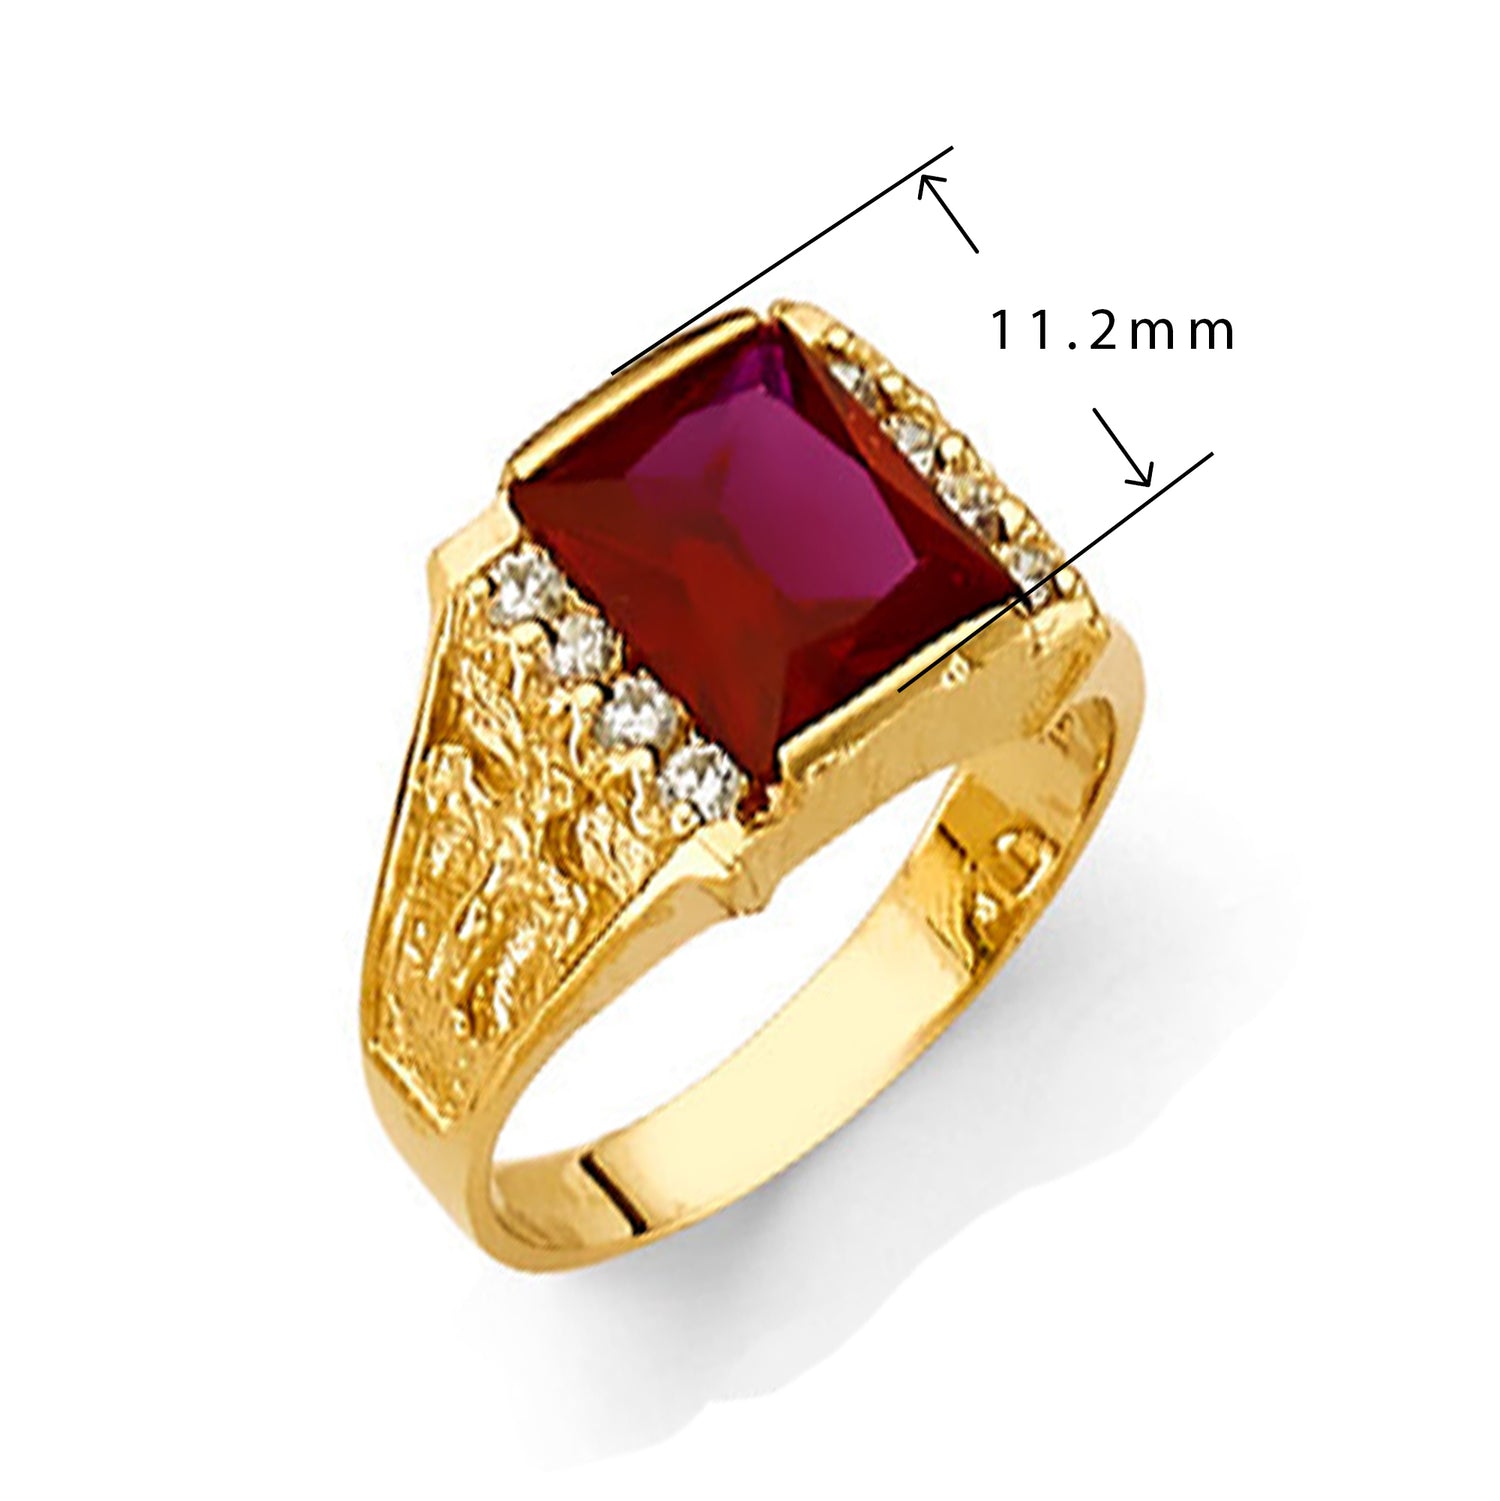 CZ Diva-styled Rectangular Garnet Ring in Solid Gold with Measurement